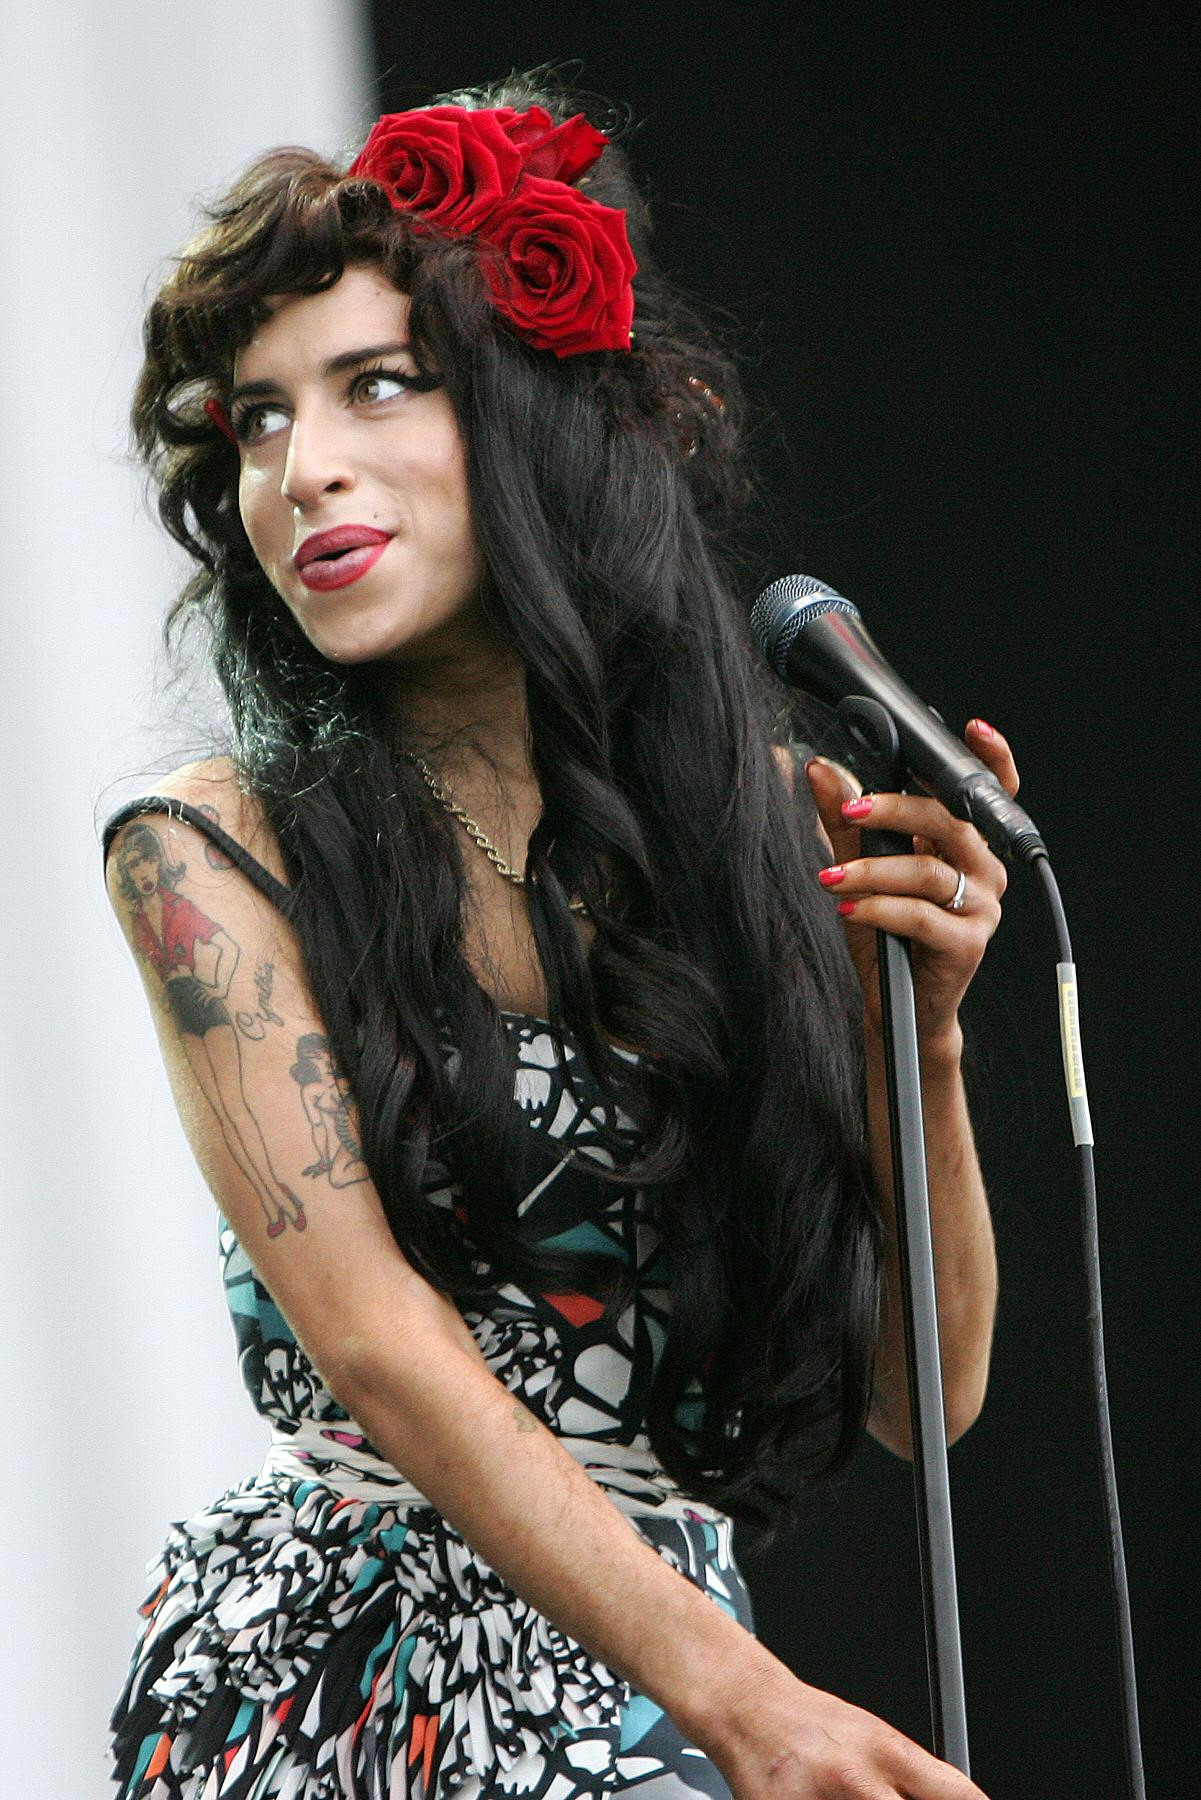 File photo of Amy Winehouse performing at the V Festival in England in 2008. 